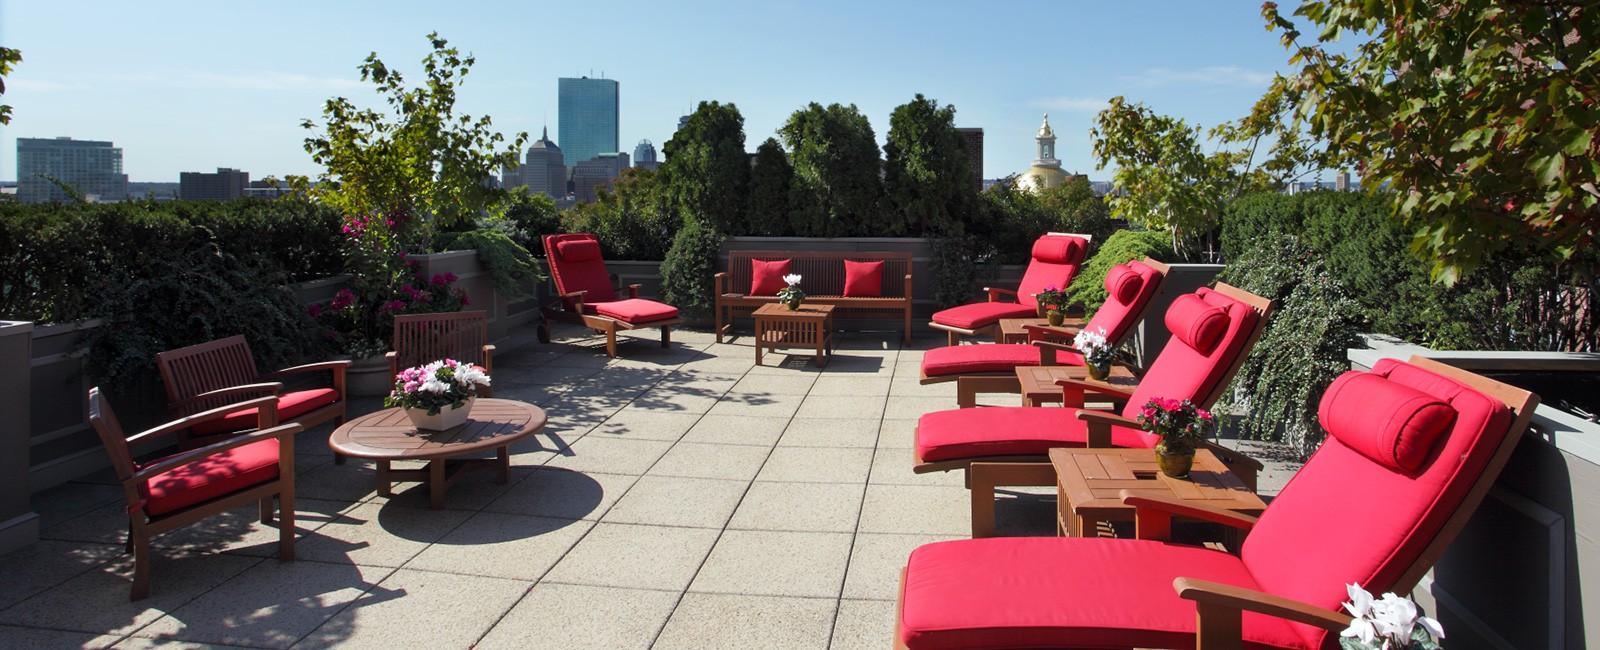 XV Beacon’s intimate Roof Deck can host cocktail receptions for 50 guests. The space is the hidden gem of Beacon Hill with views from the 12th floor of the hotel overlooking Boston’s skyline and views of the Charles River.